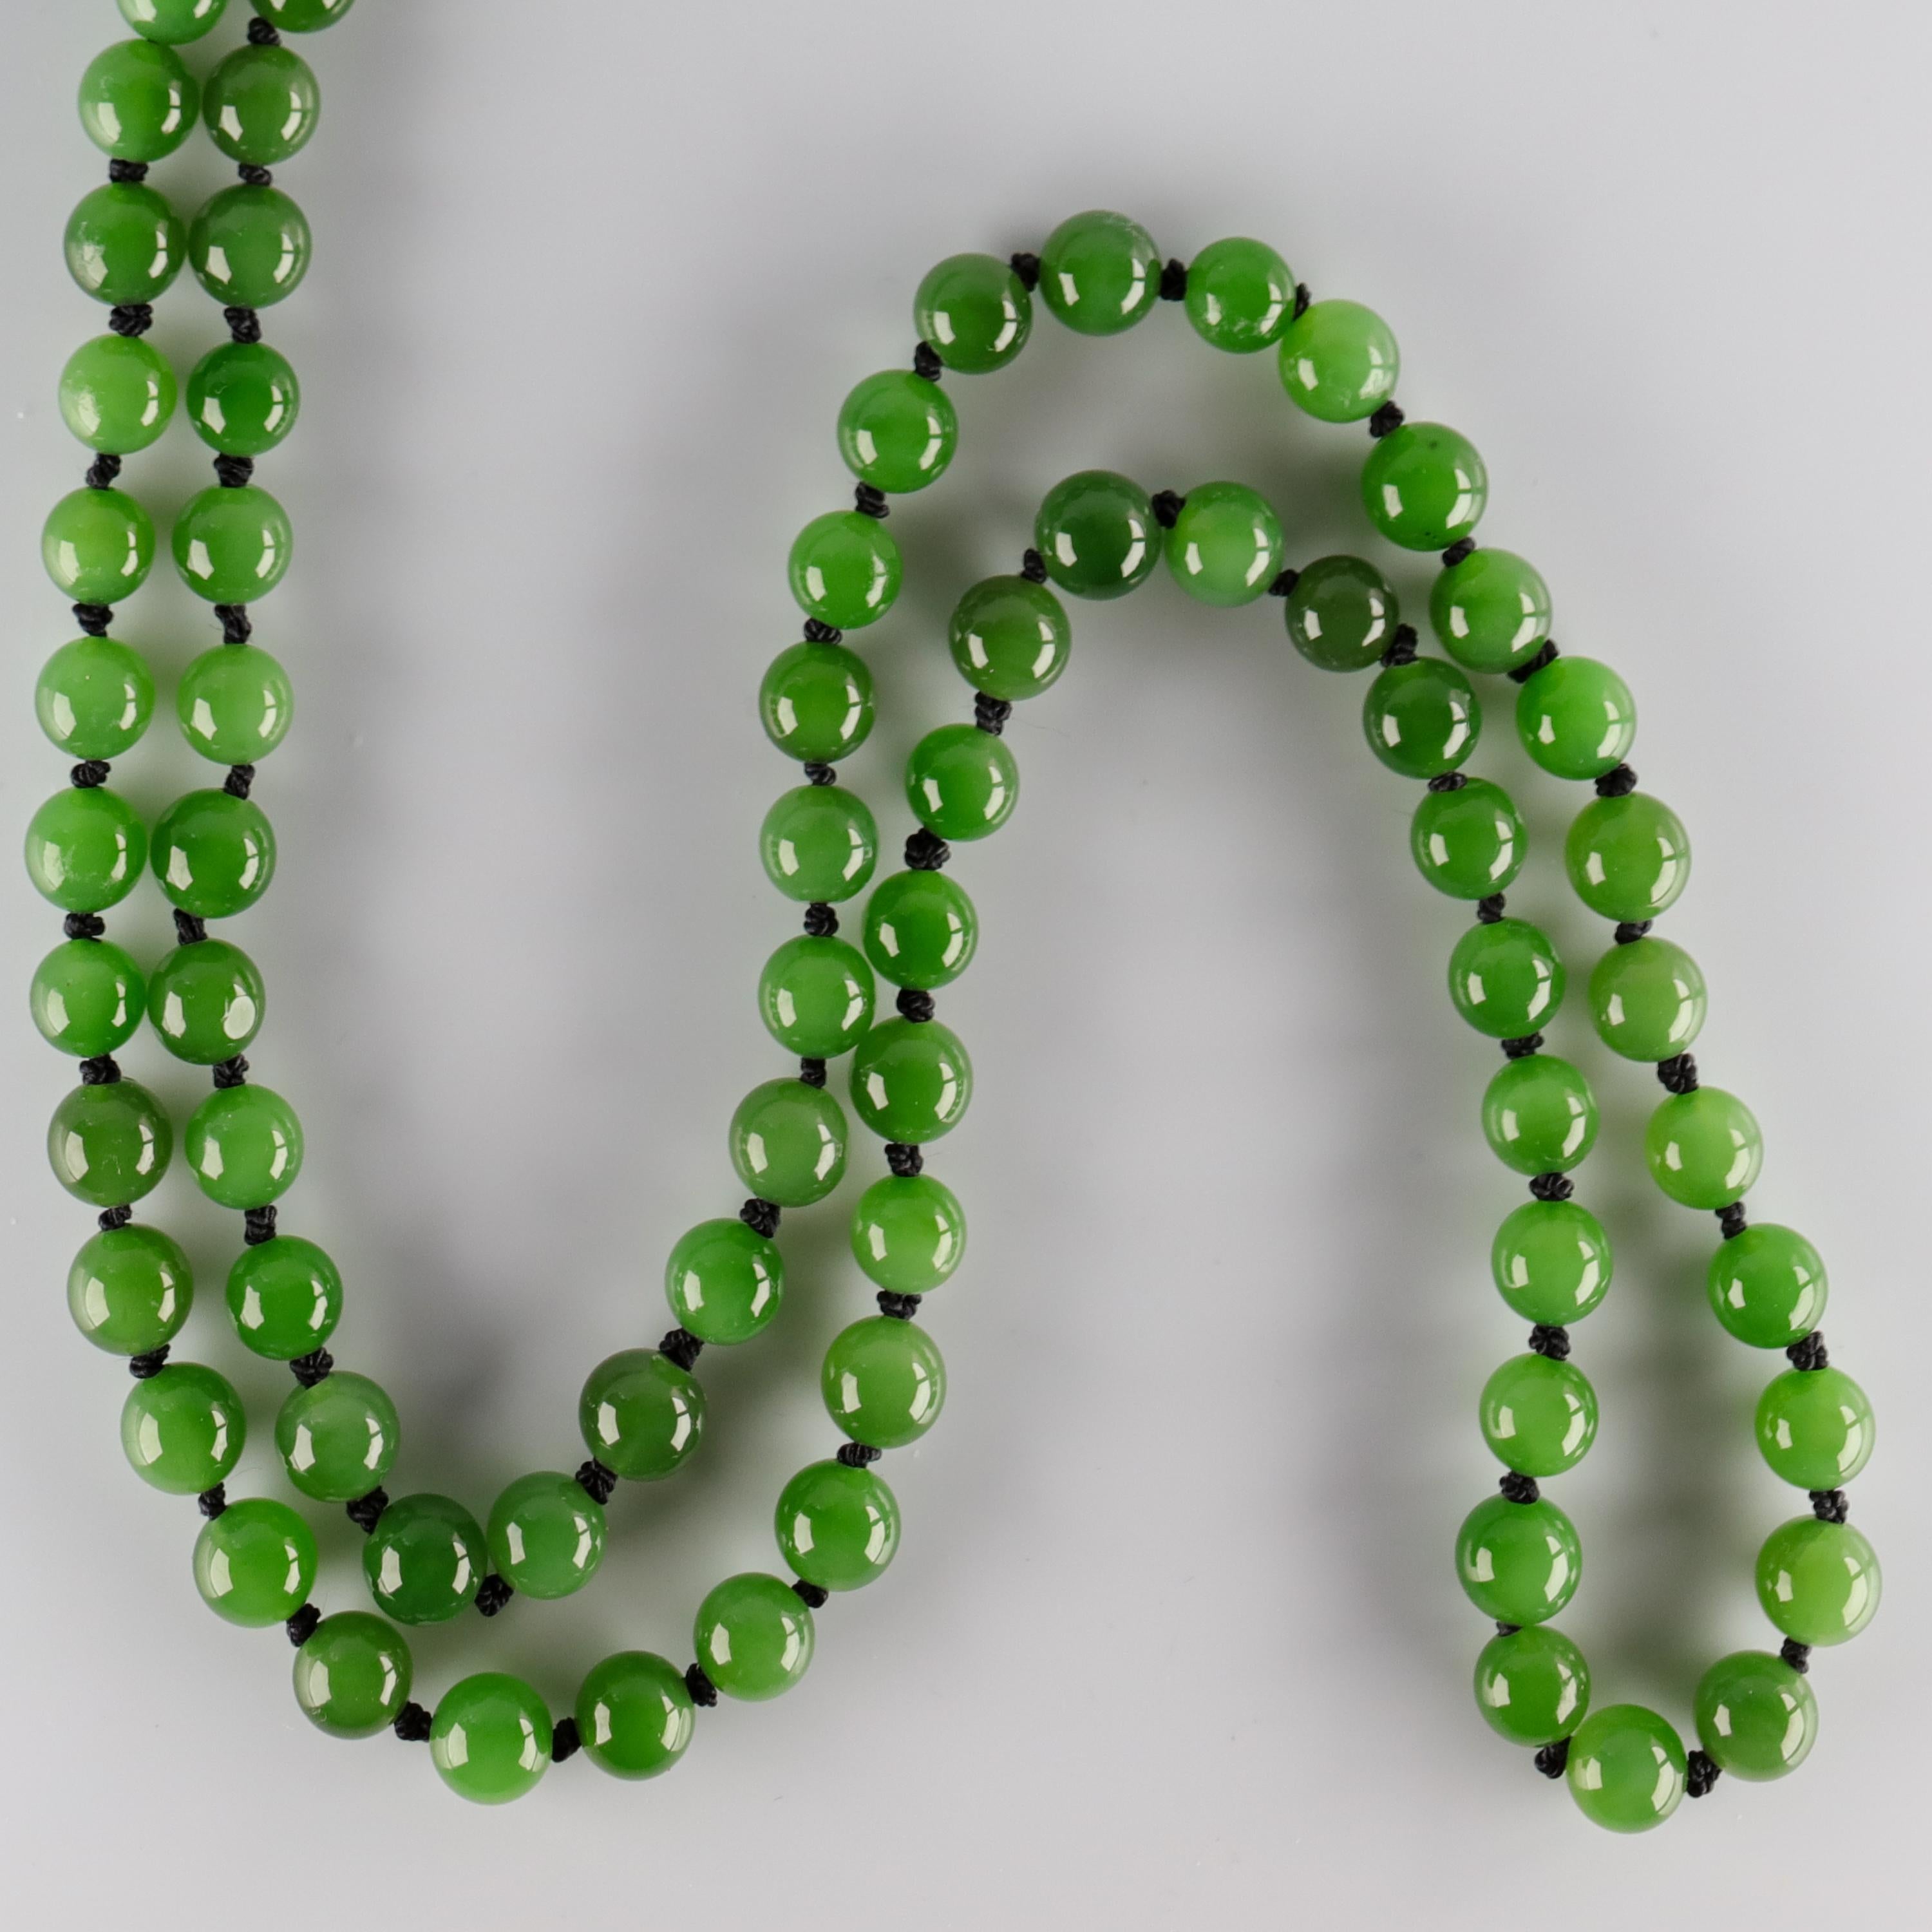 Jade Necklace with Rare Chatoyancy Certified Untreated 3